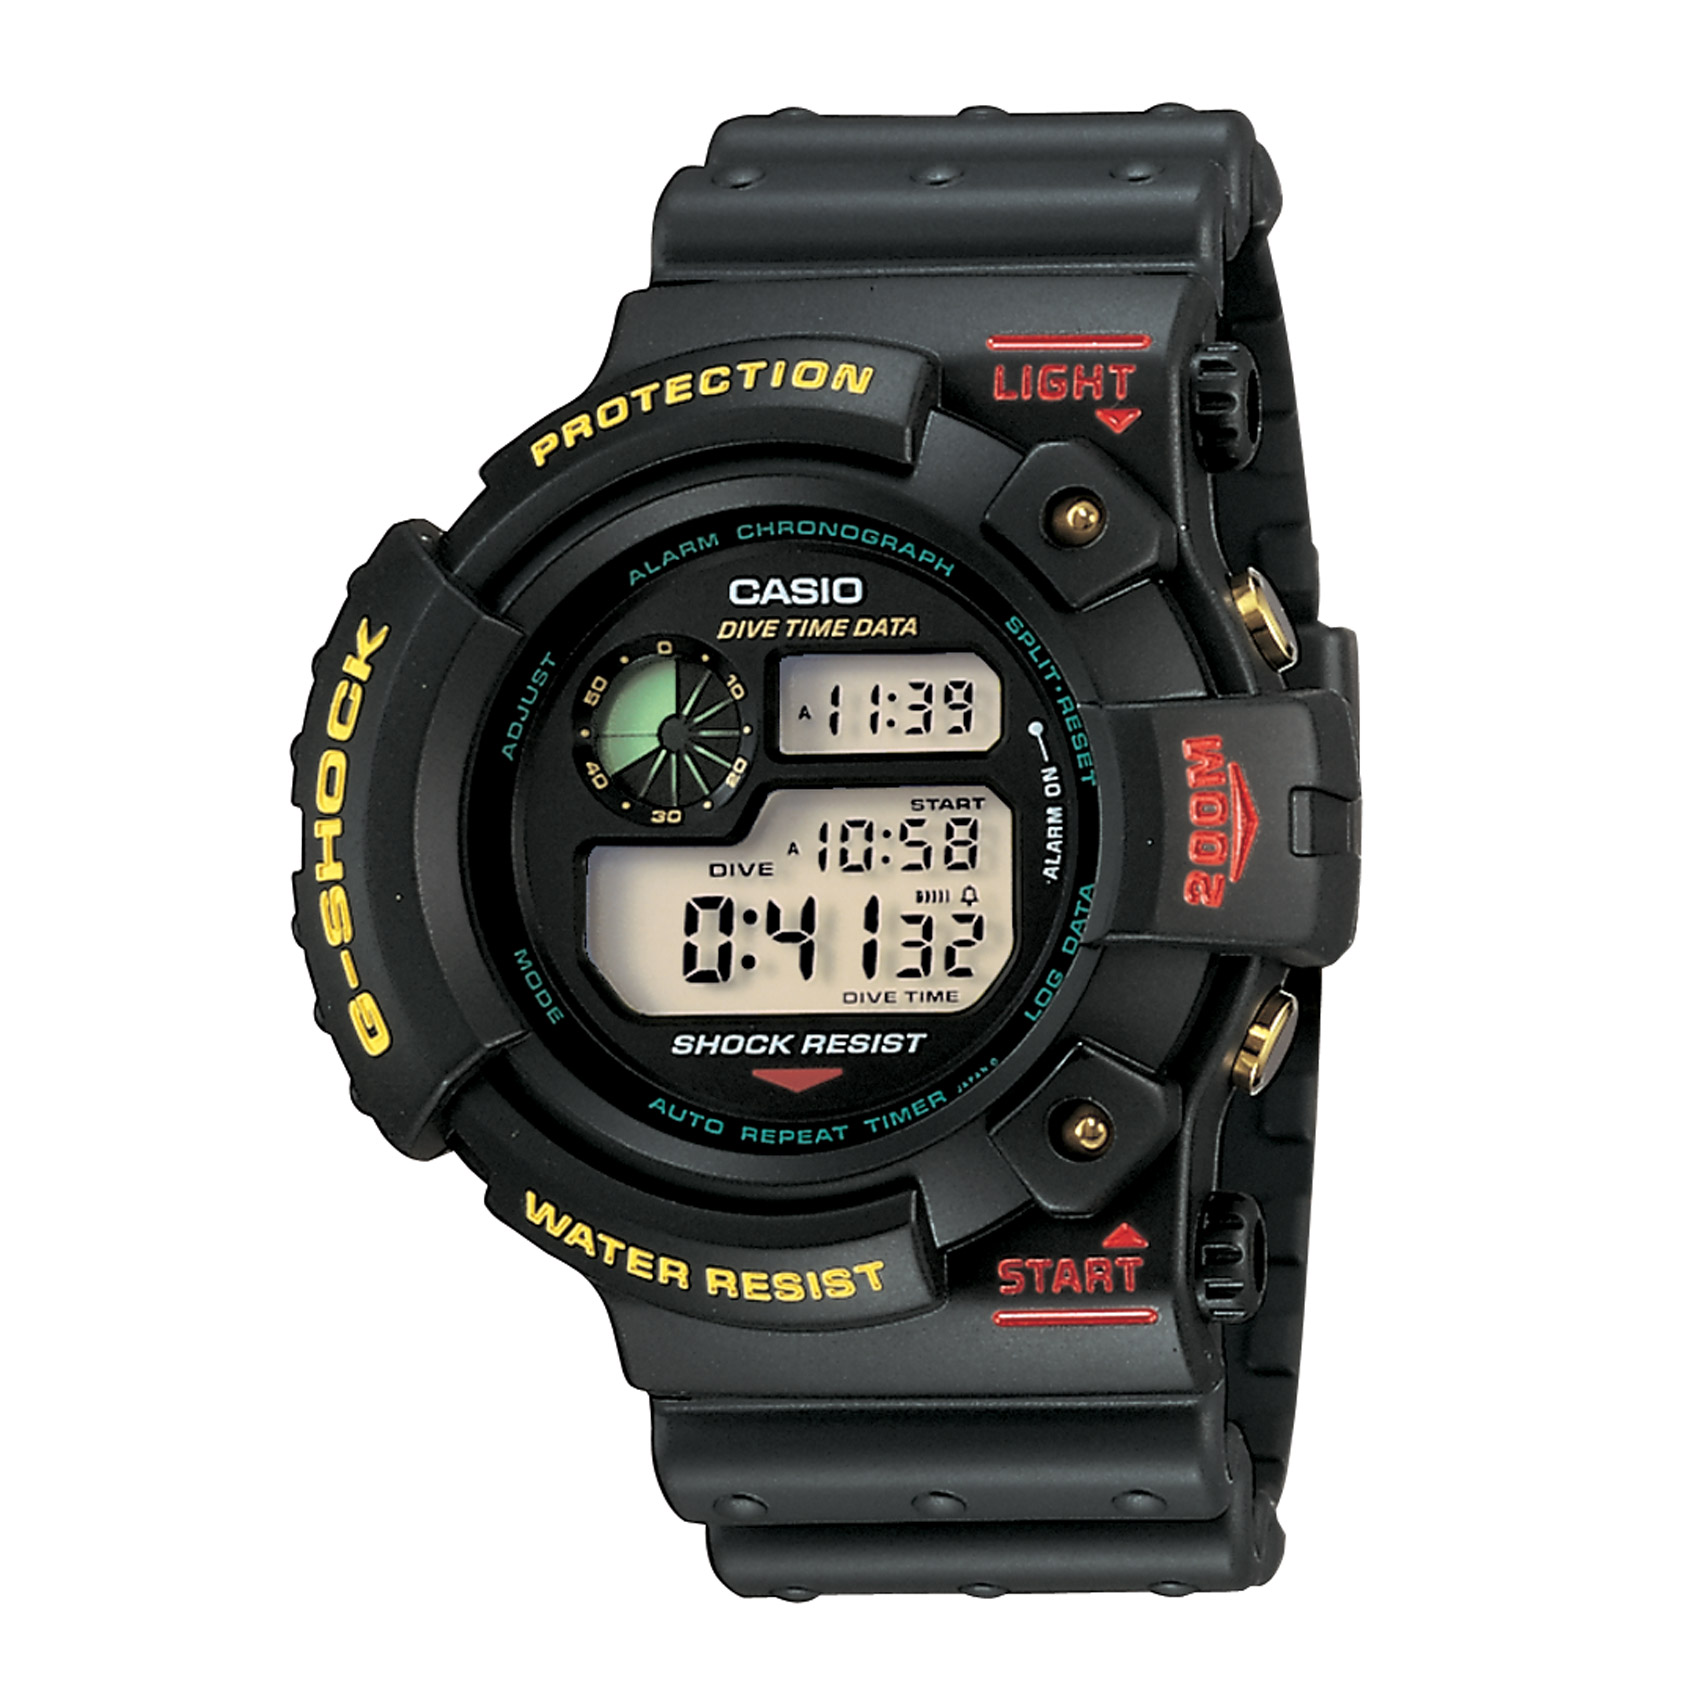 Other products include the 1993 diver's watch, which is water-resistant